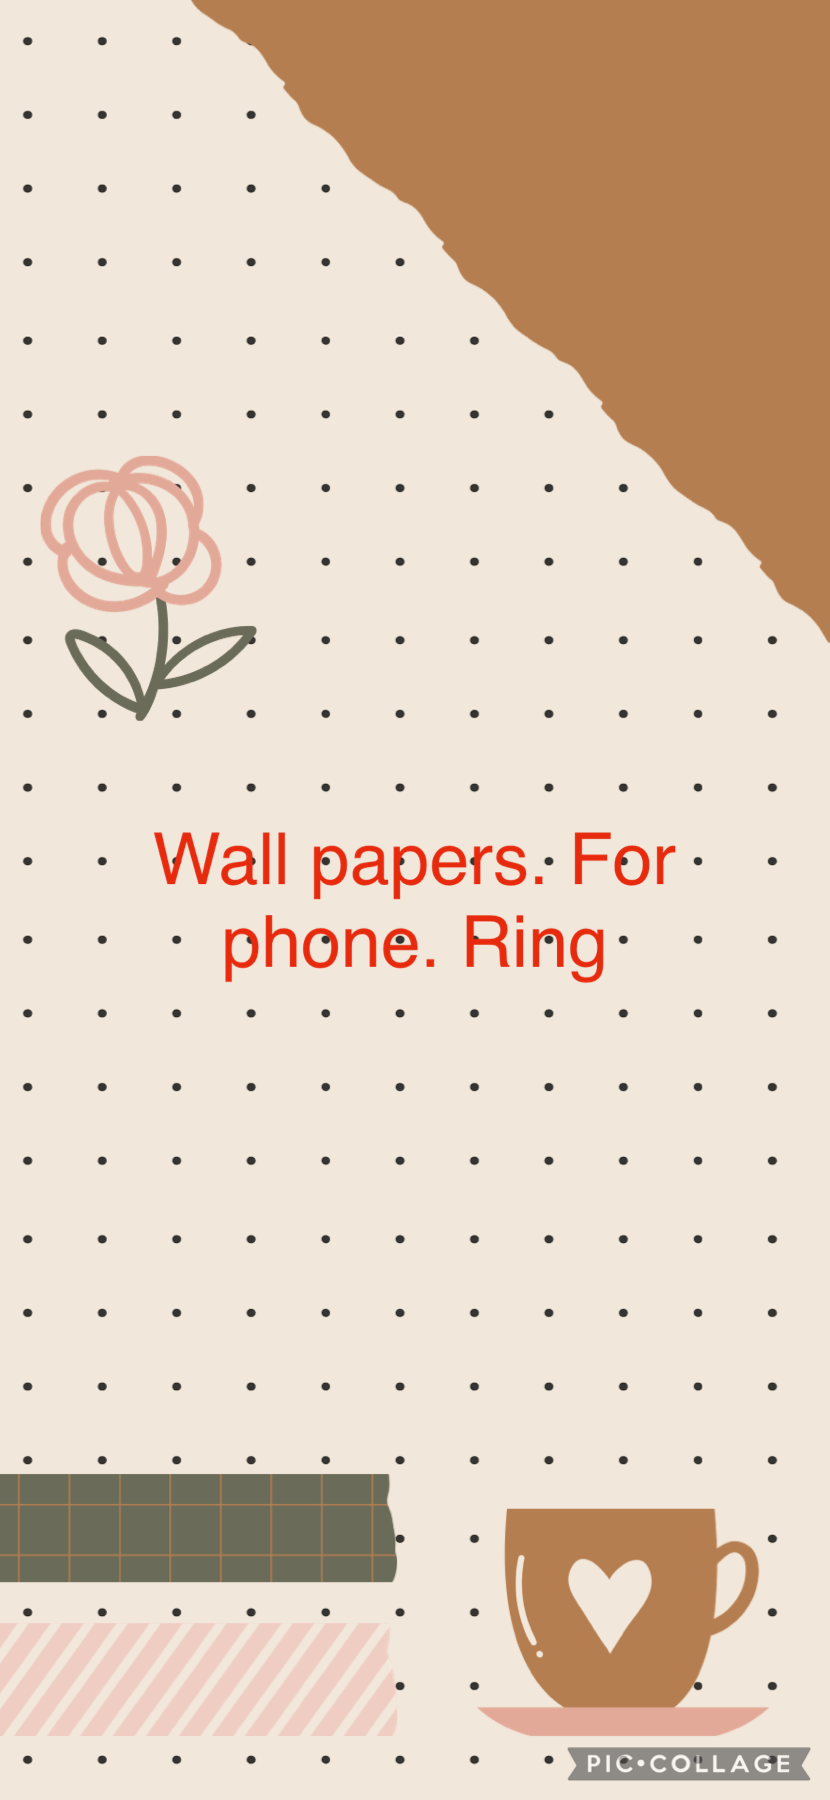 #wall papers for phone pic art  ring